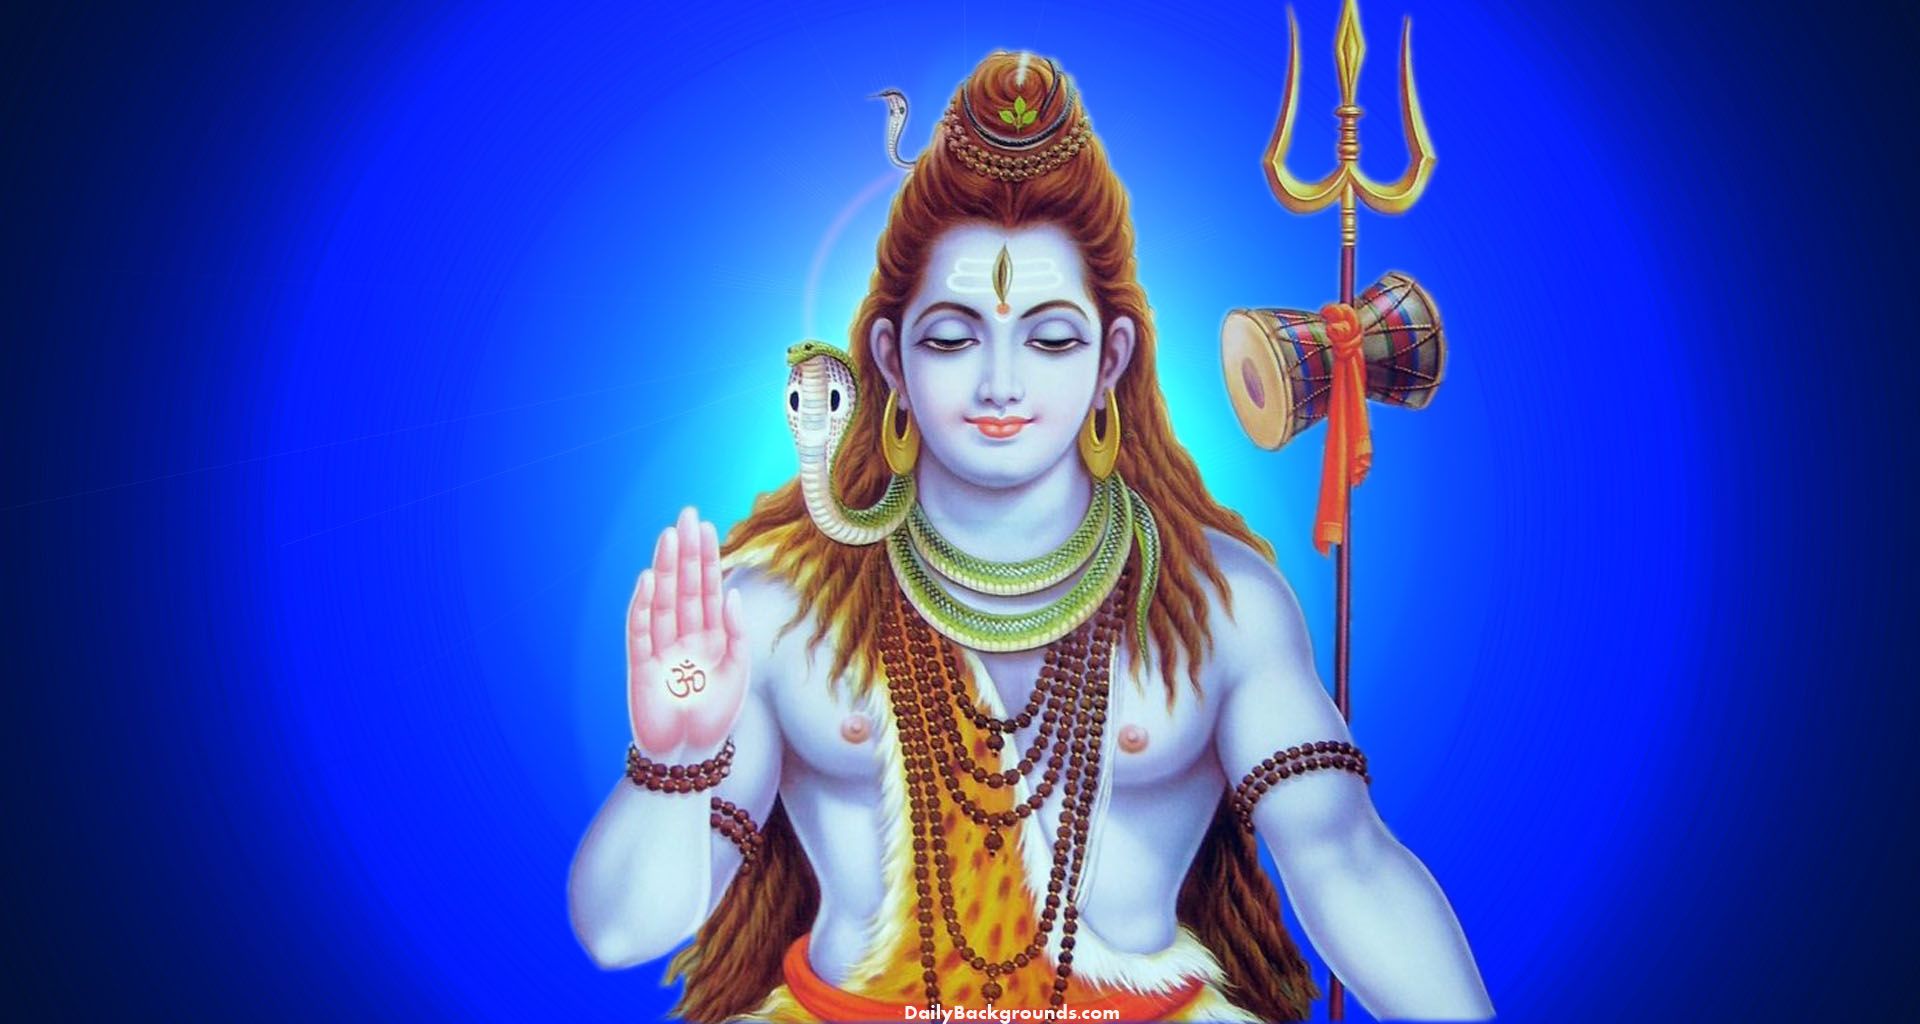 Free download Download Lord Shiva Rudra Roop Wallpaper Wallpaper HD Local News [1920x1024] for your Desktop, Mobile & Tablet. Explore Download Lord Shiva Wallpaper. Lord Shiva Image Wallpaper, Shiva